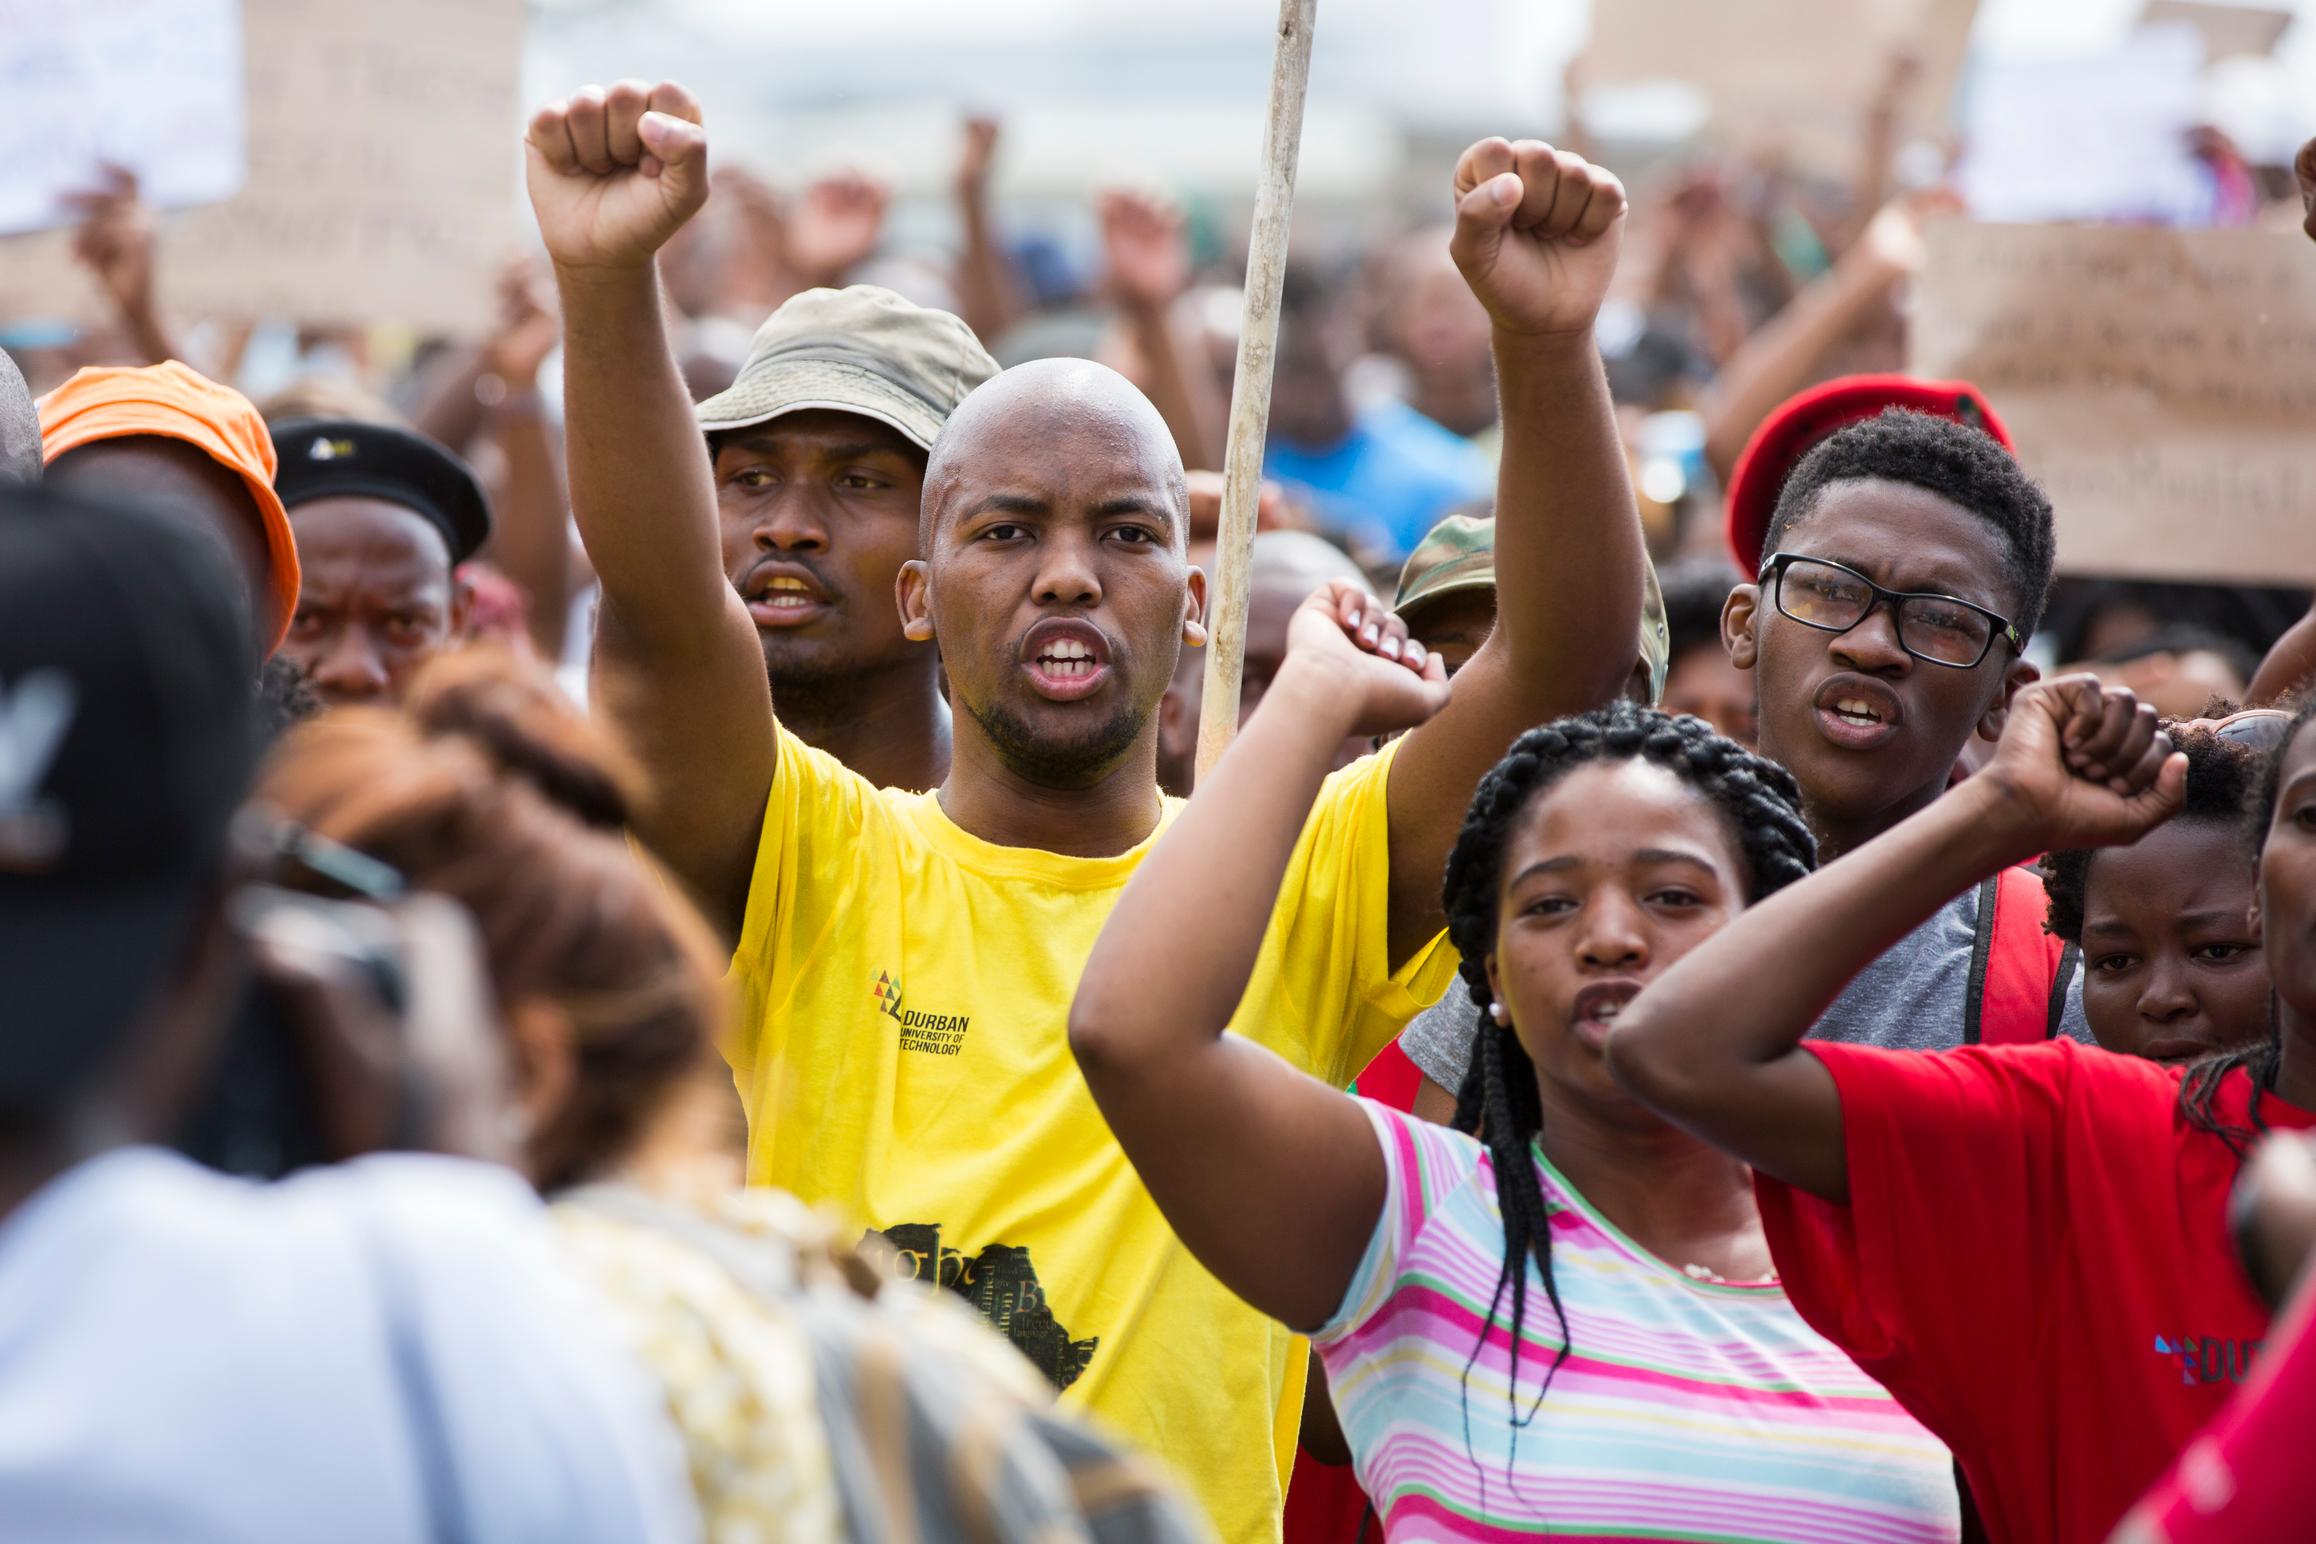 Young people participate in a protest with fists raised in the air.